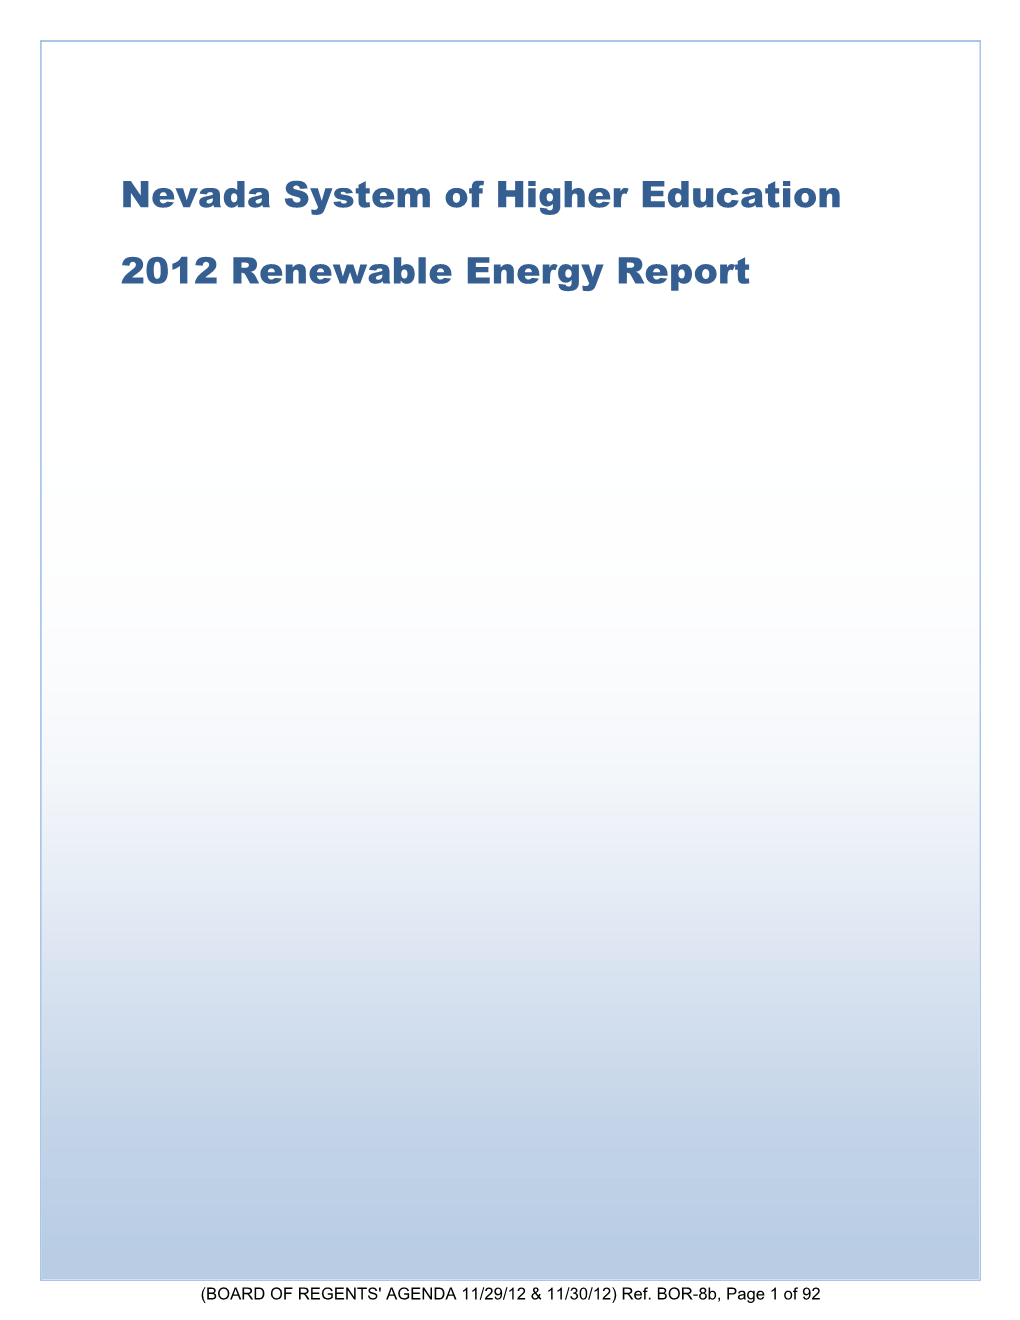 Nevada System of Higher Education 2012 Renewable Energy Report